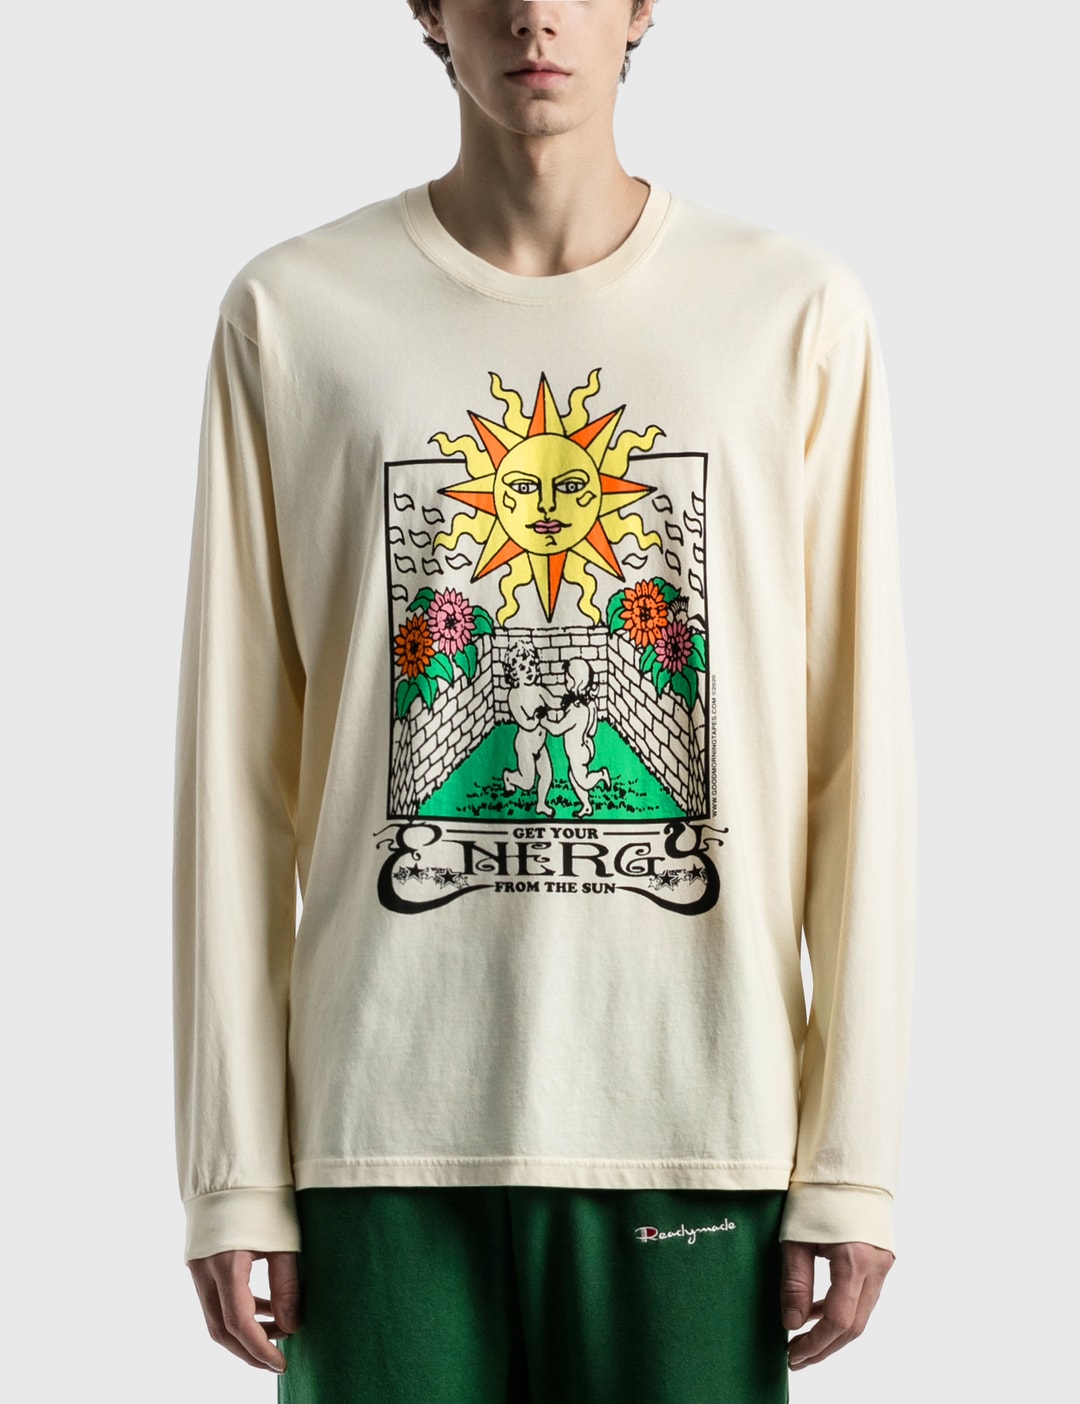 Good Morning Tapes - Energy From The Sun Long Sleeve T-Shirt | HBX ...